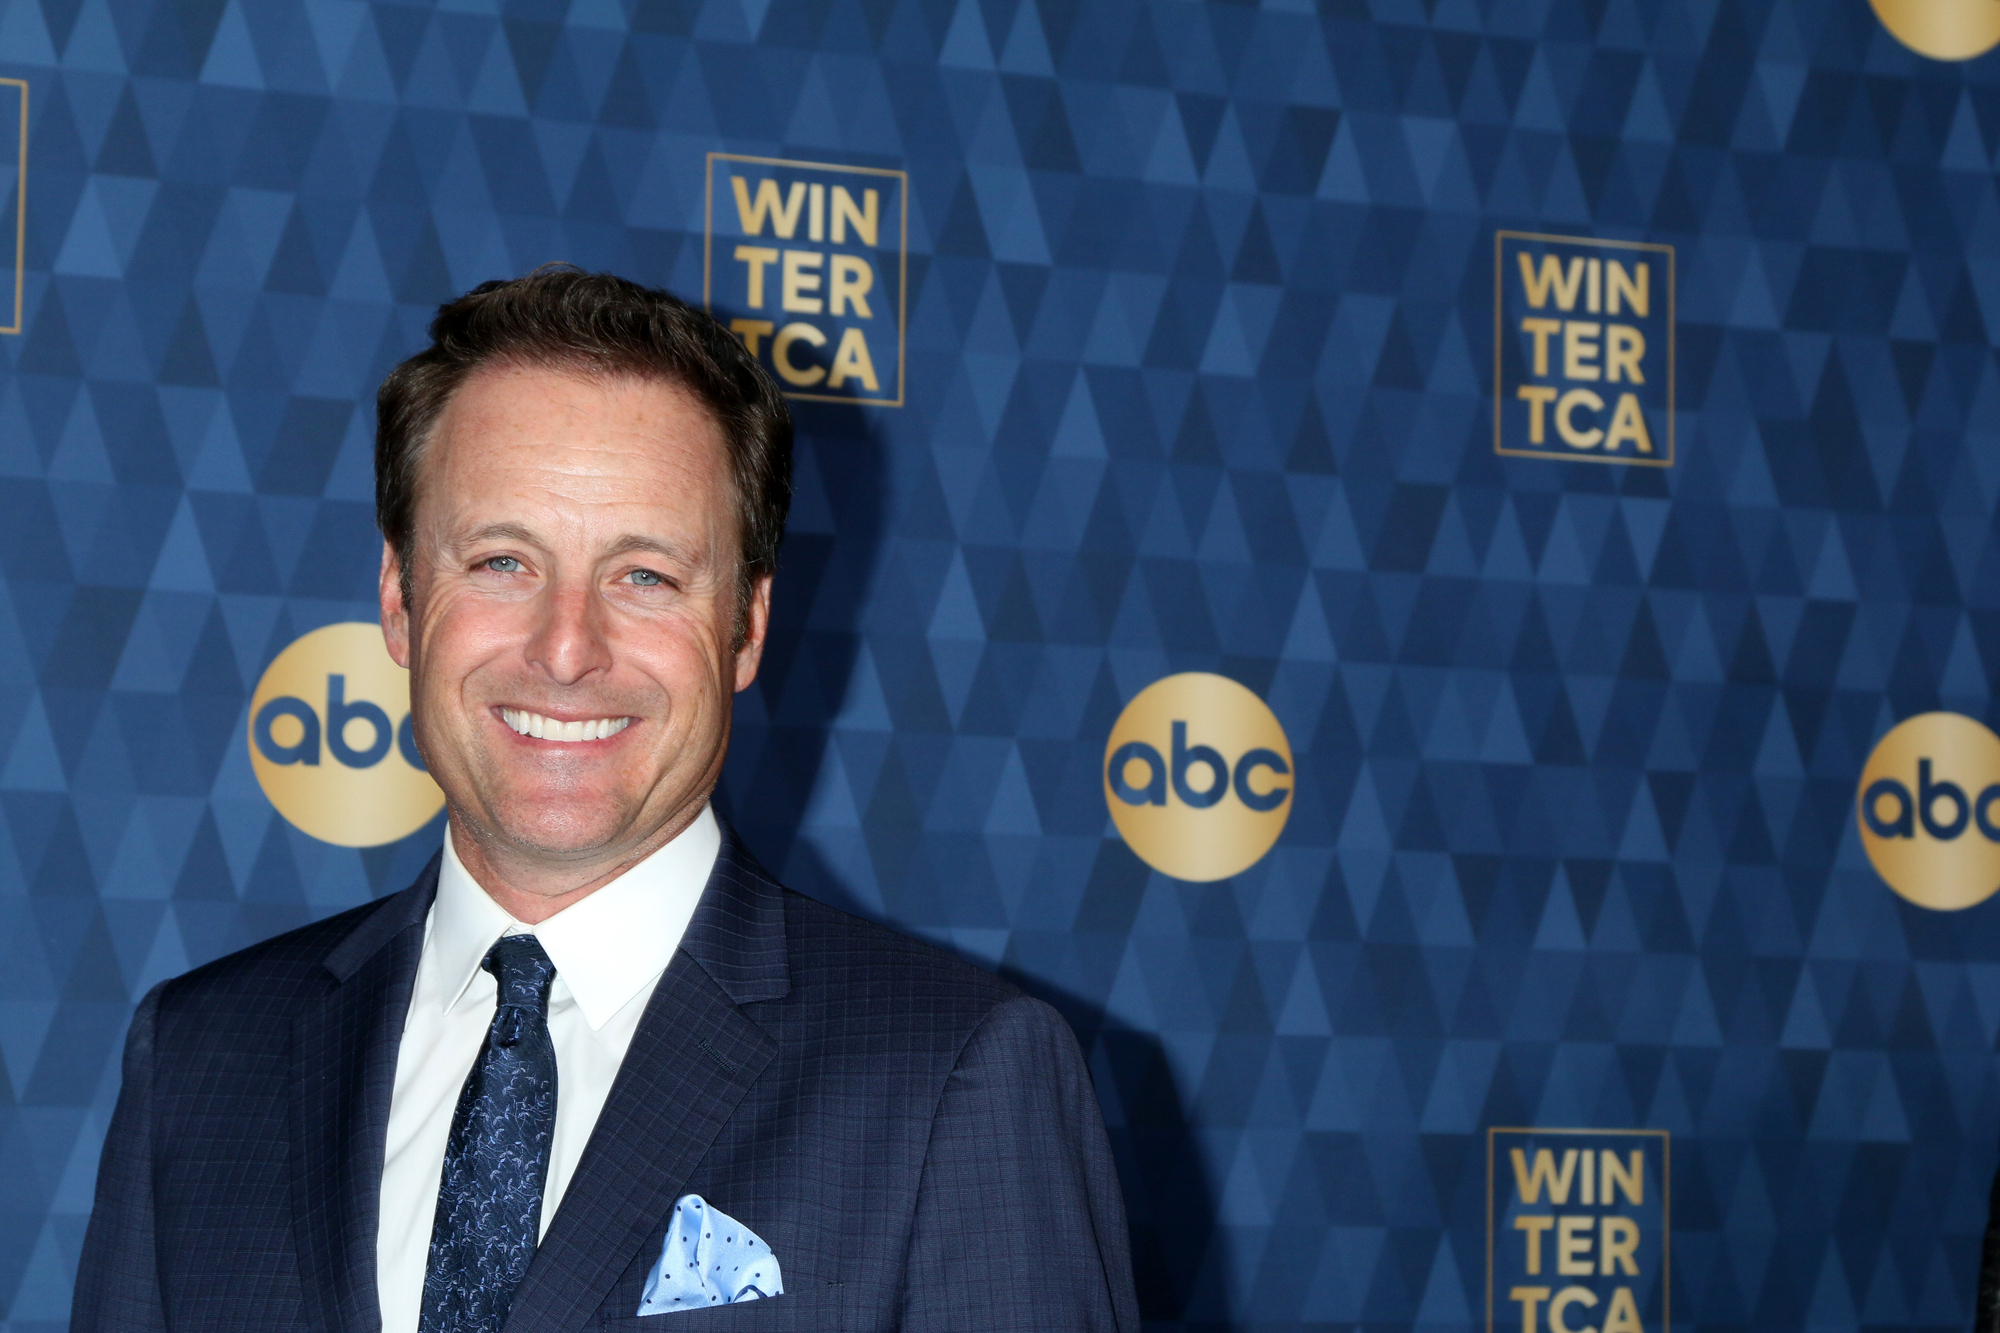 Chris Harrison at the ABC Winter TCA Party Arrivals at the Langham Huntington Hotel